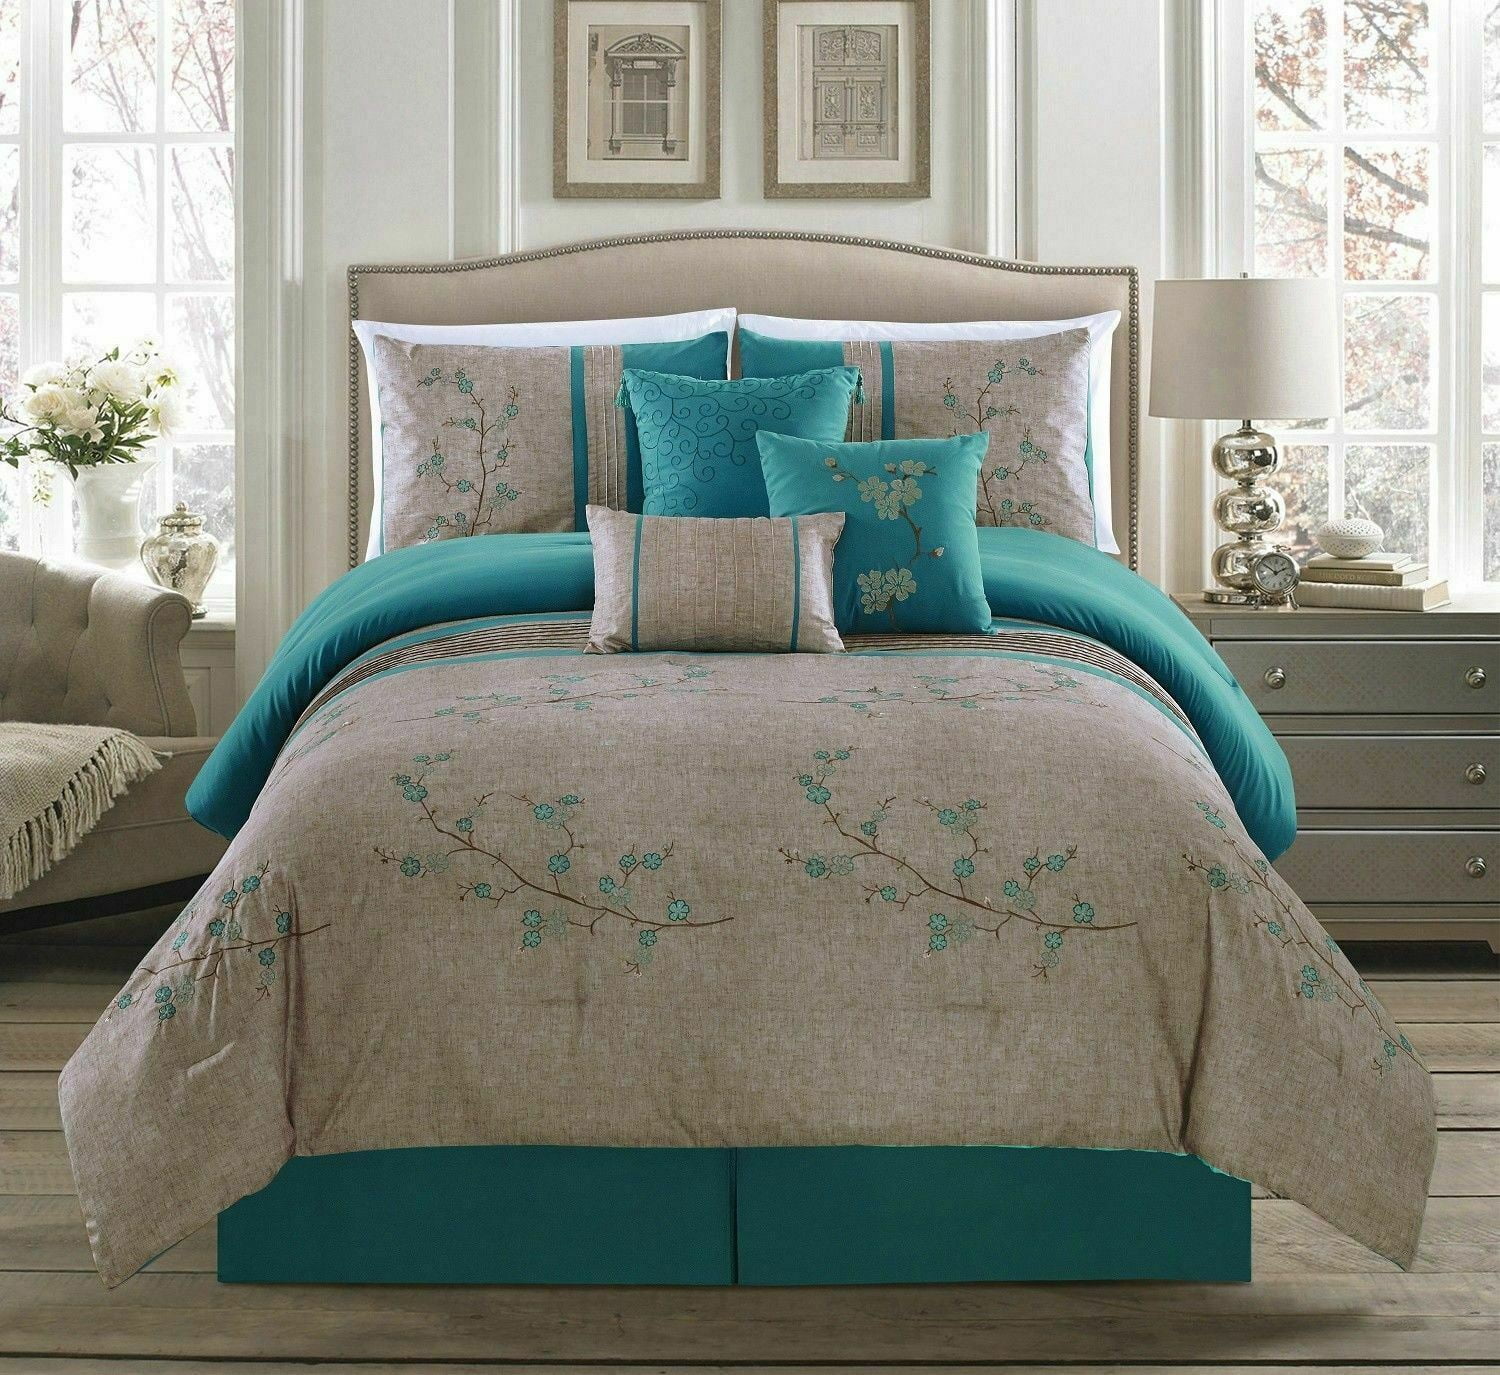 Details about   7-Piece Blue Gray Embroidered Floral Comforter Set or 4pcs Windown Curtain Set 